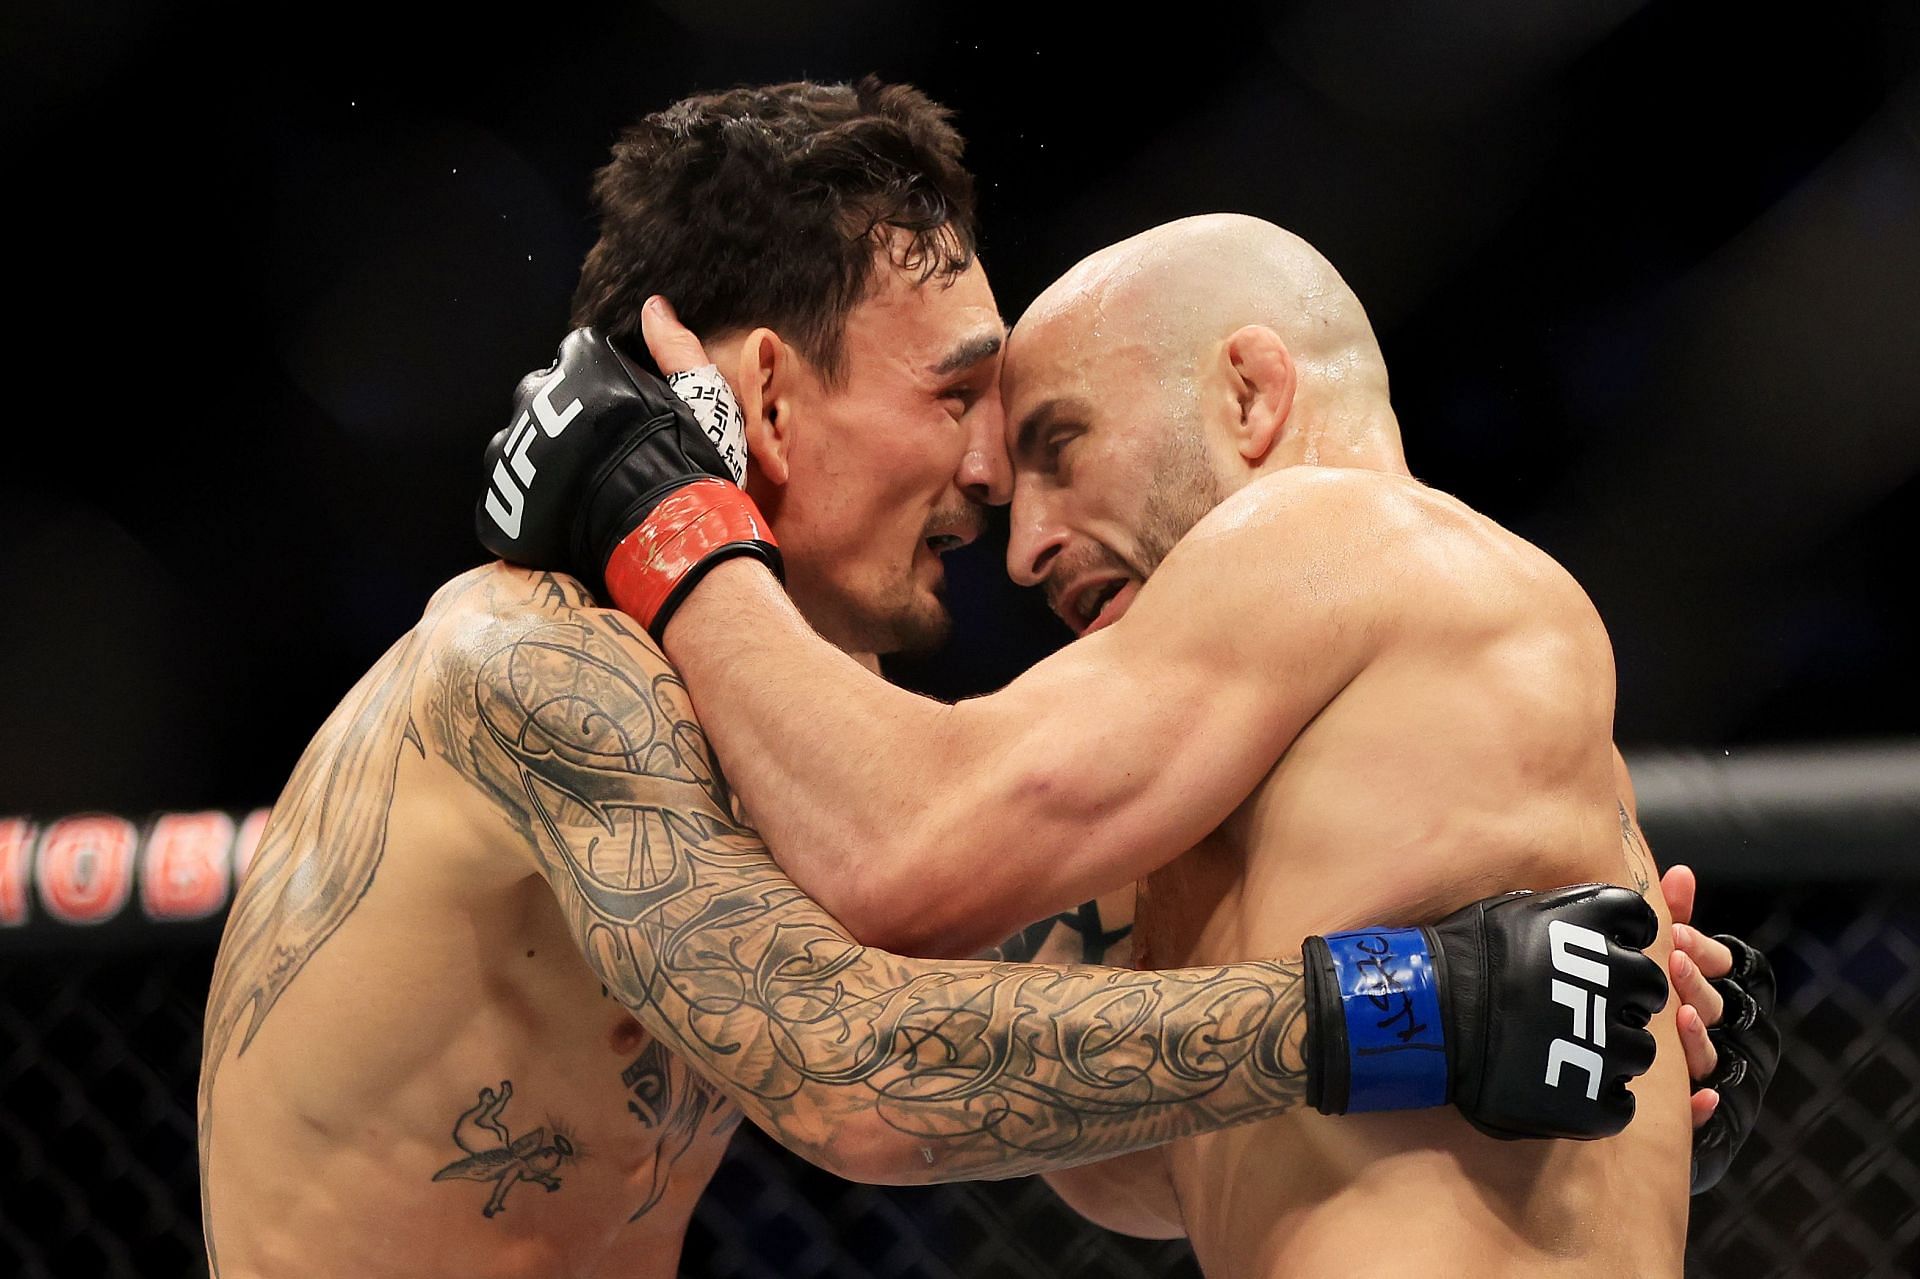 Alexander Volkanovski and Max Holloway embrace each other following their trilogy fight